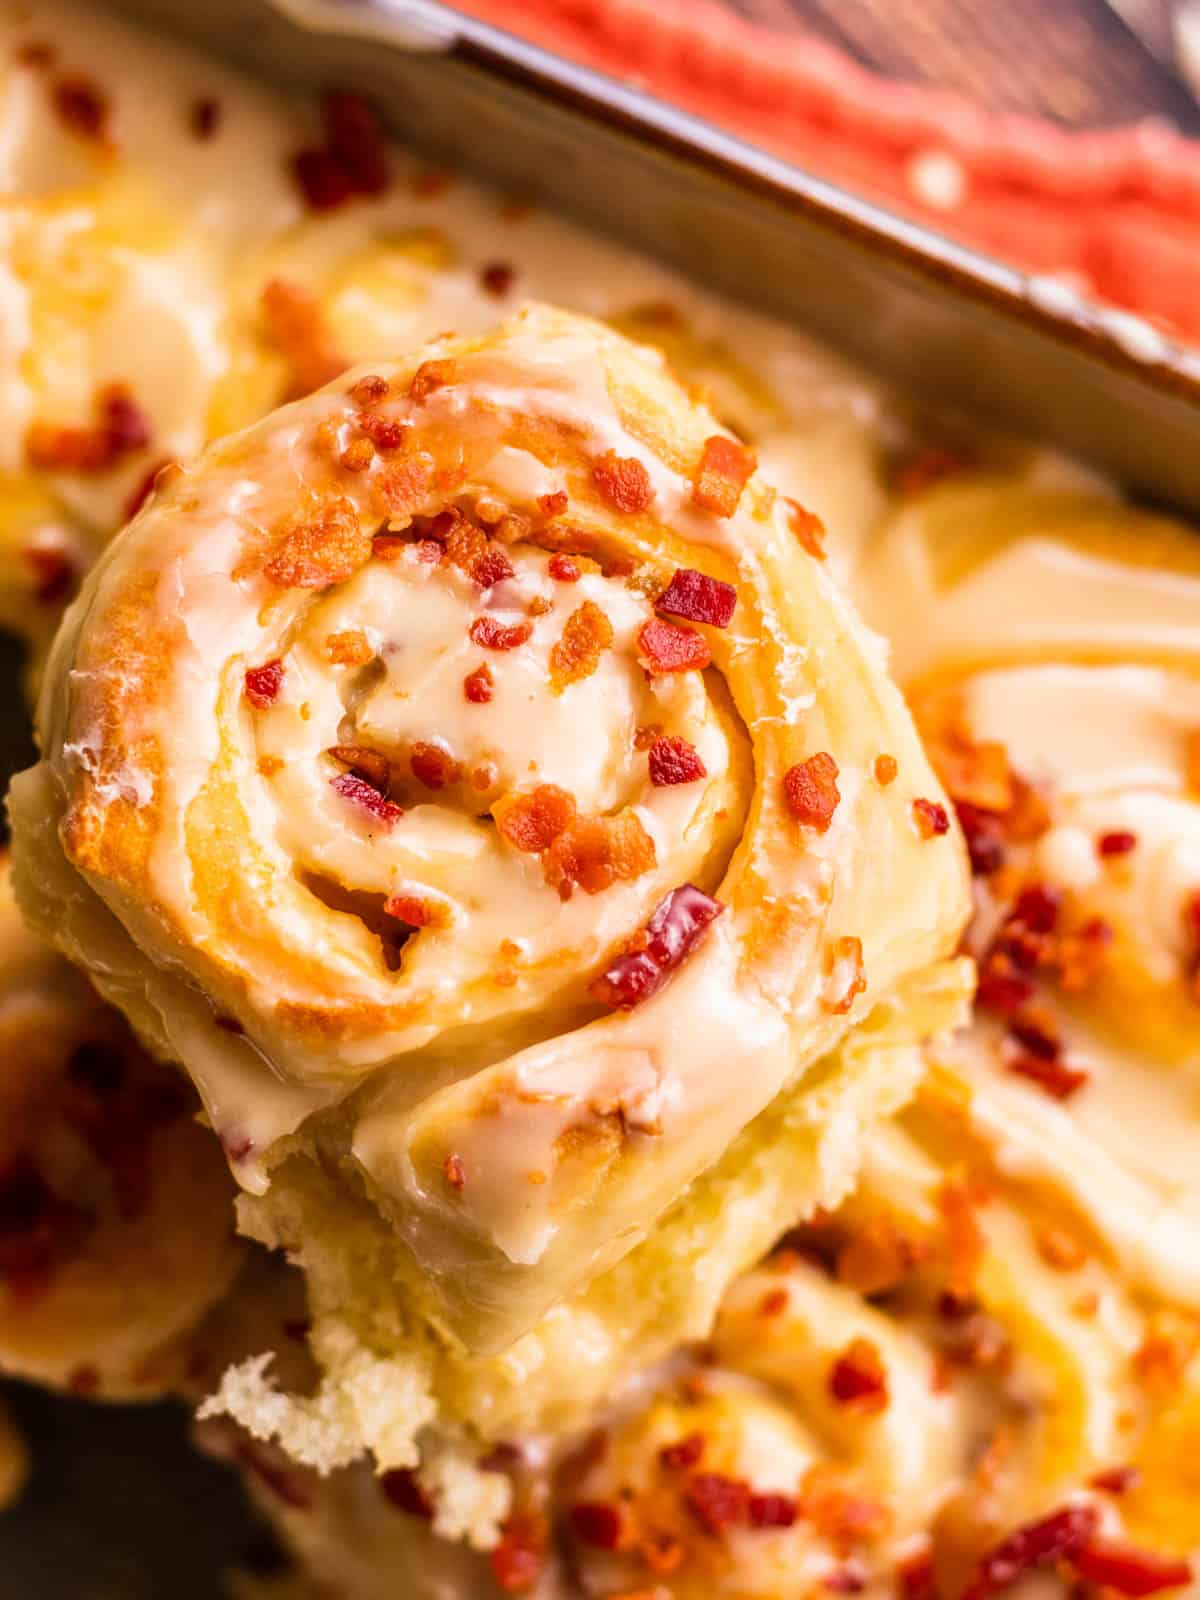 close up of a cinnamon roll covered in icing and crispy bacon pieces.